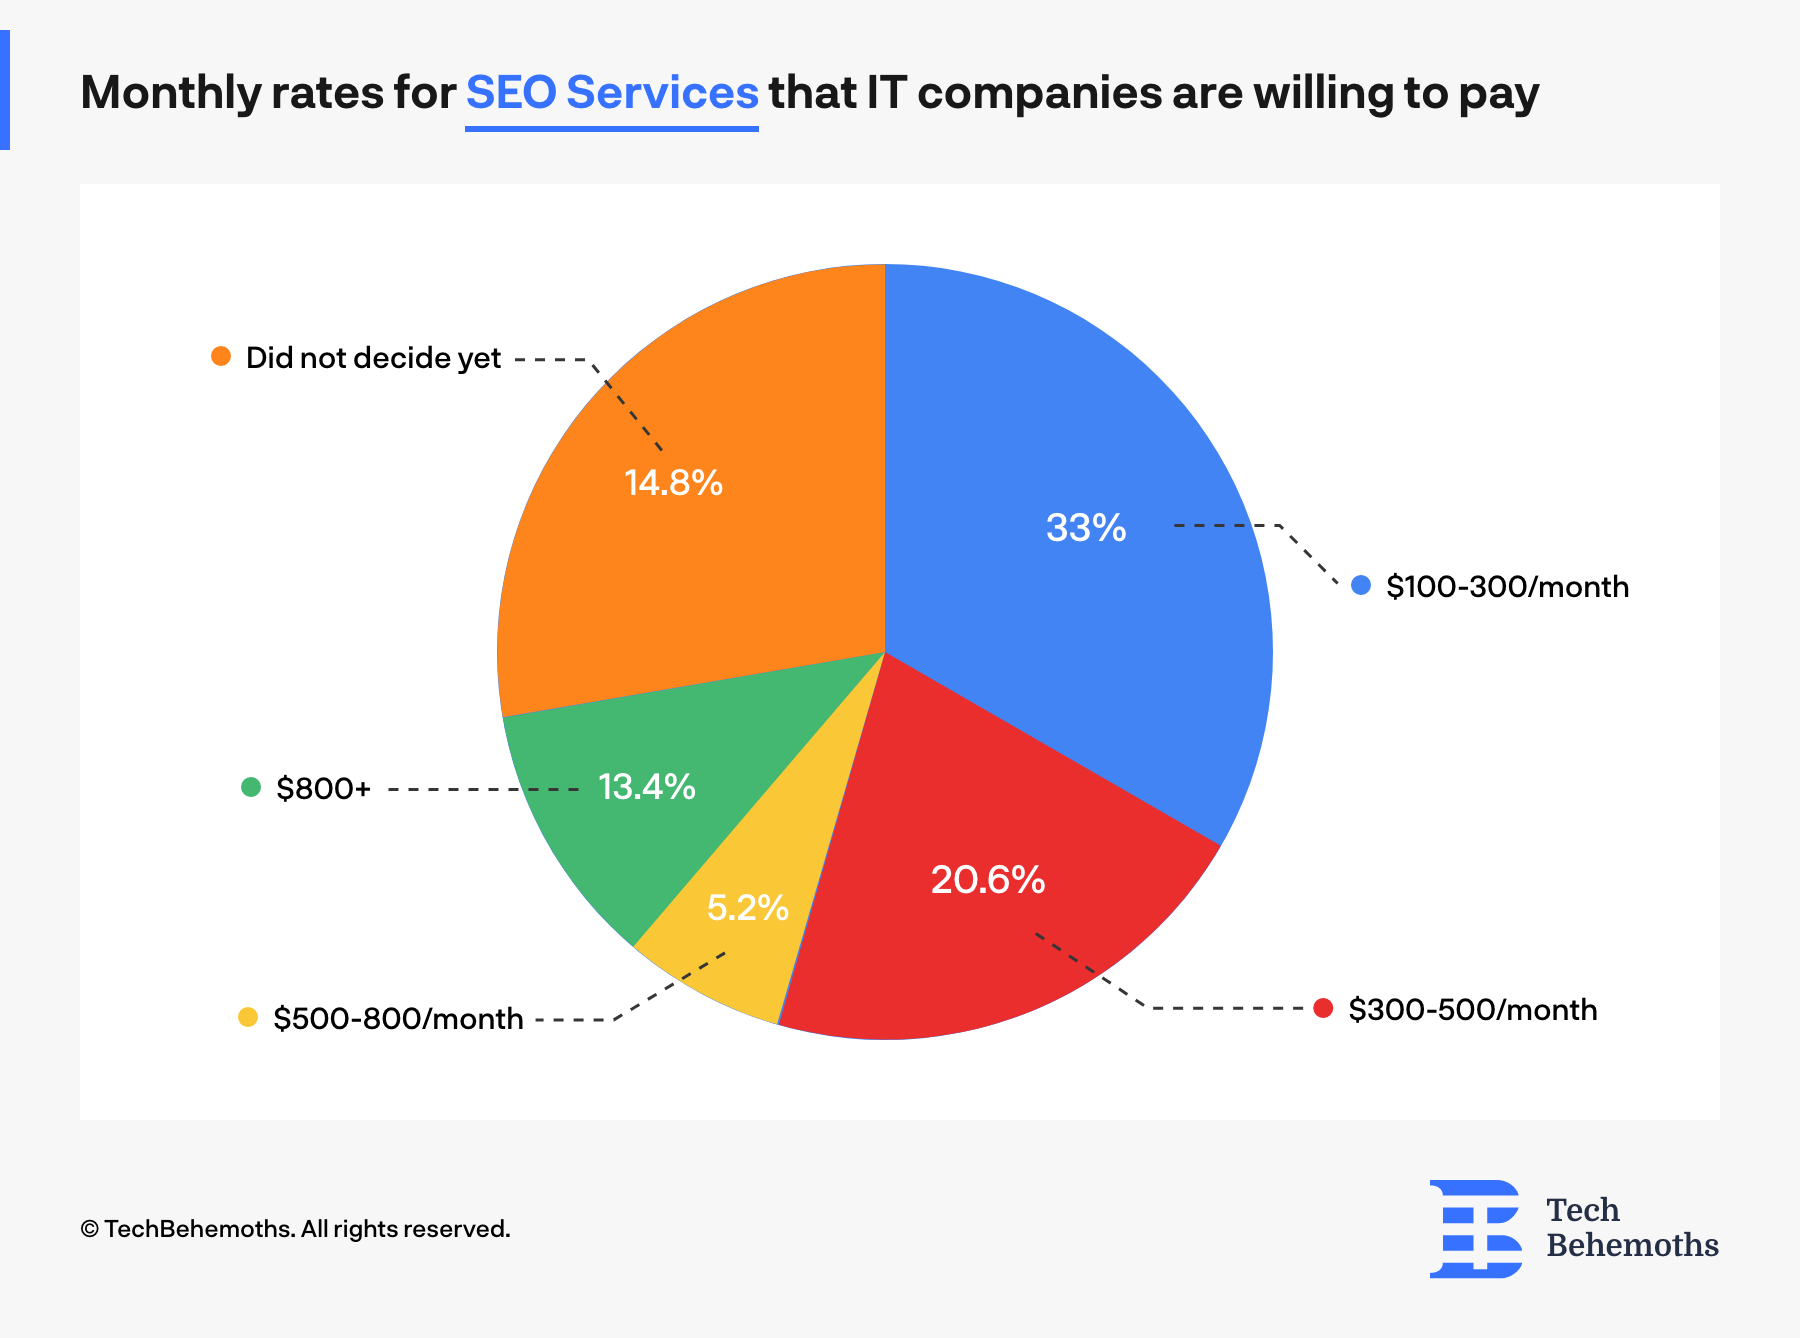 only 13.4% of IT companies want to pay more than $800/mo for SEO services